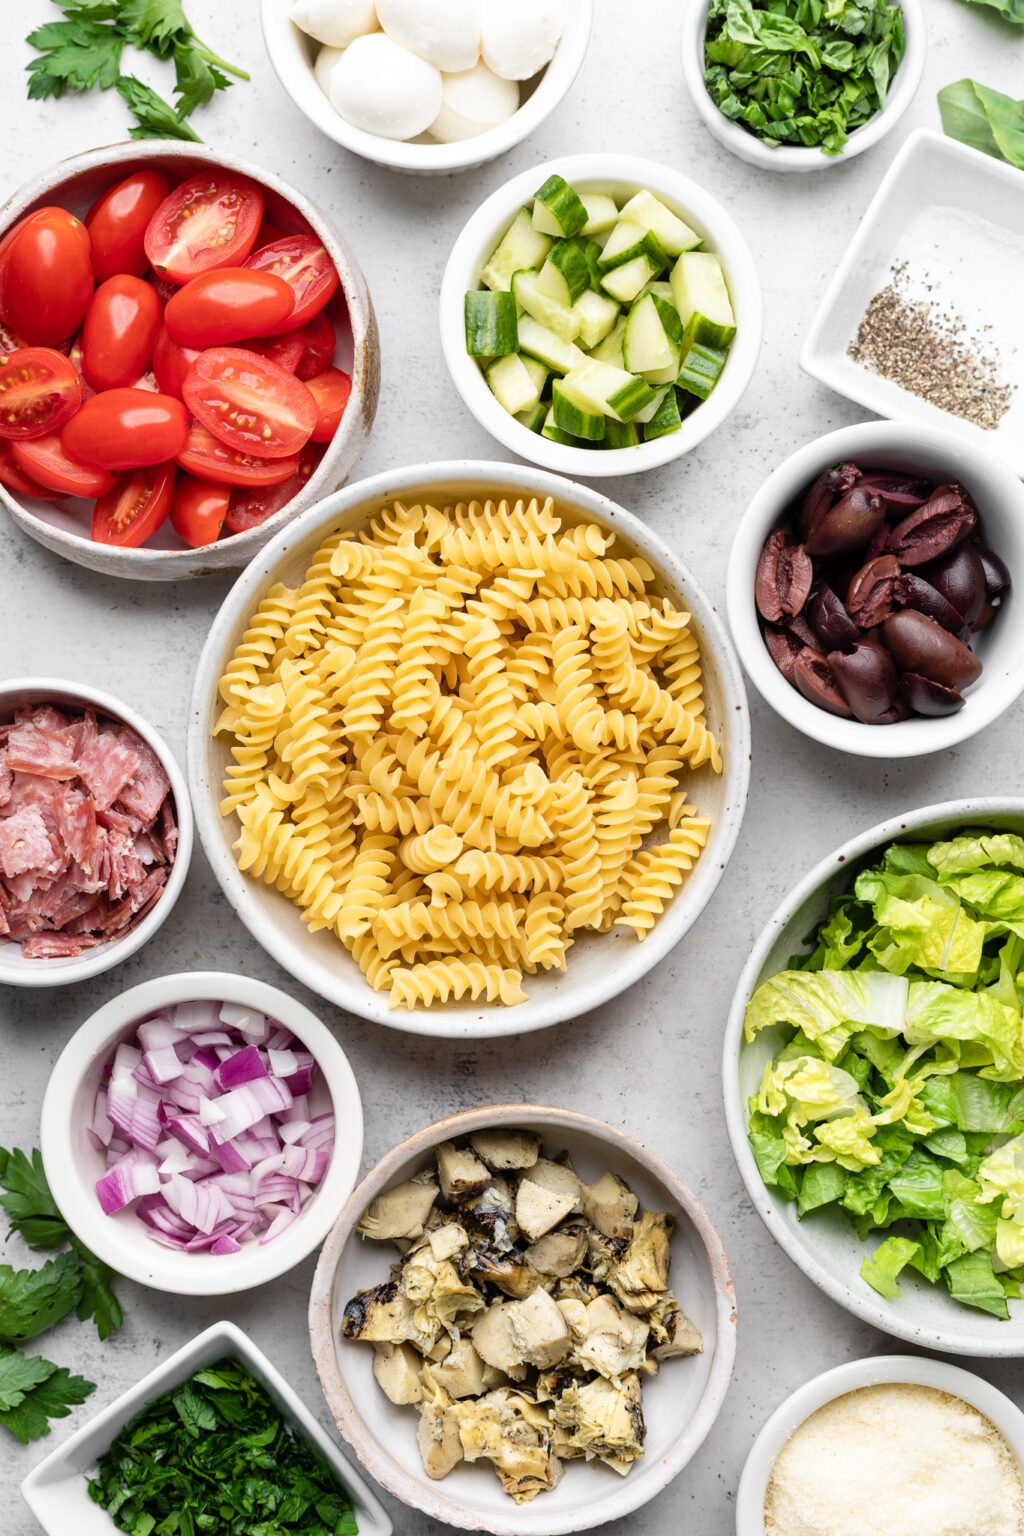 Italian Pasta Salad - All the Healthy Things